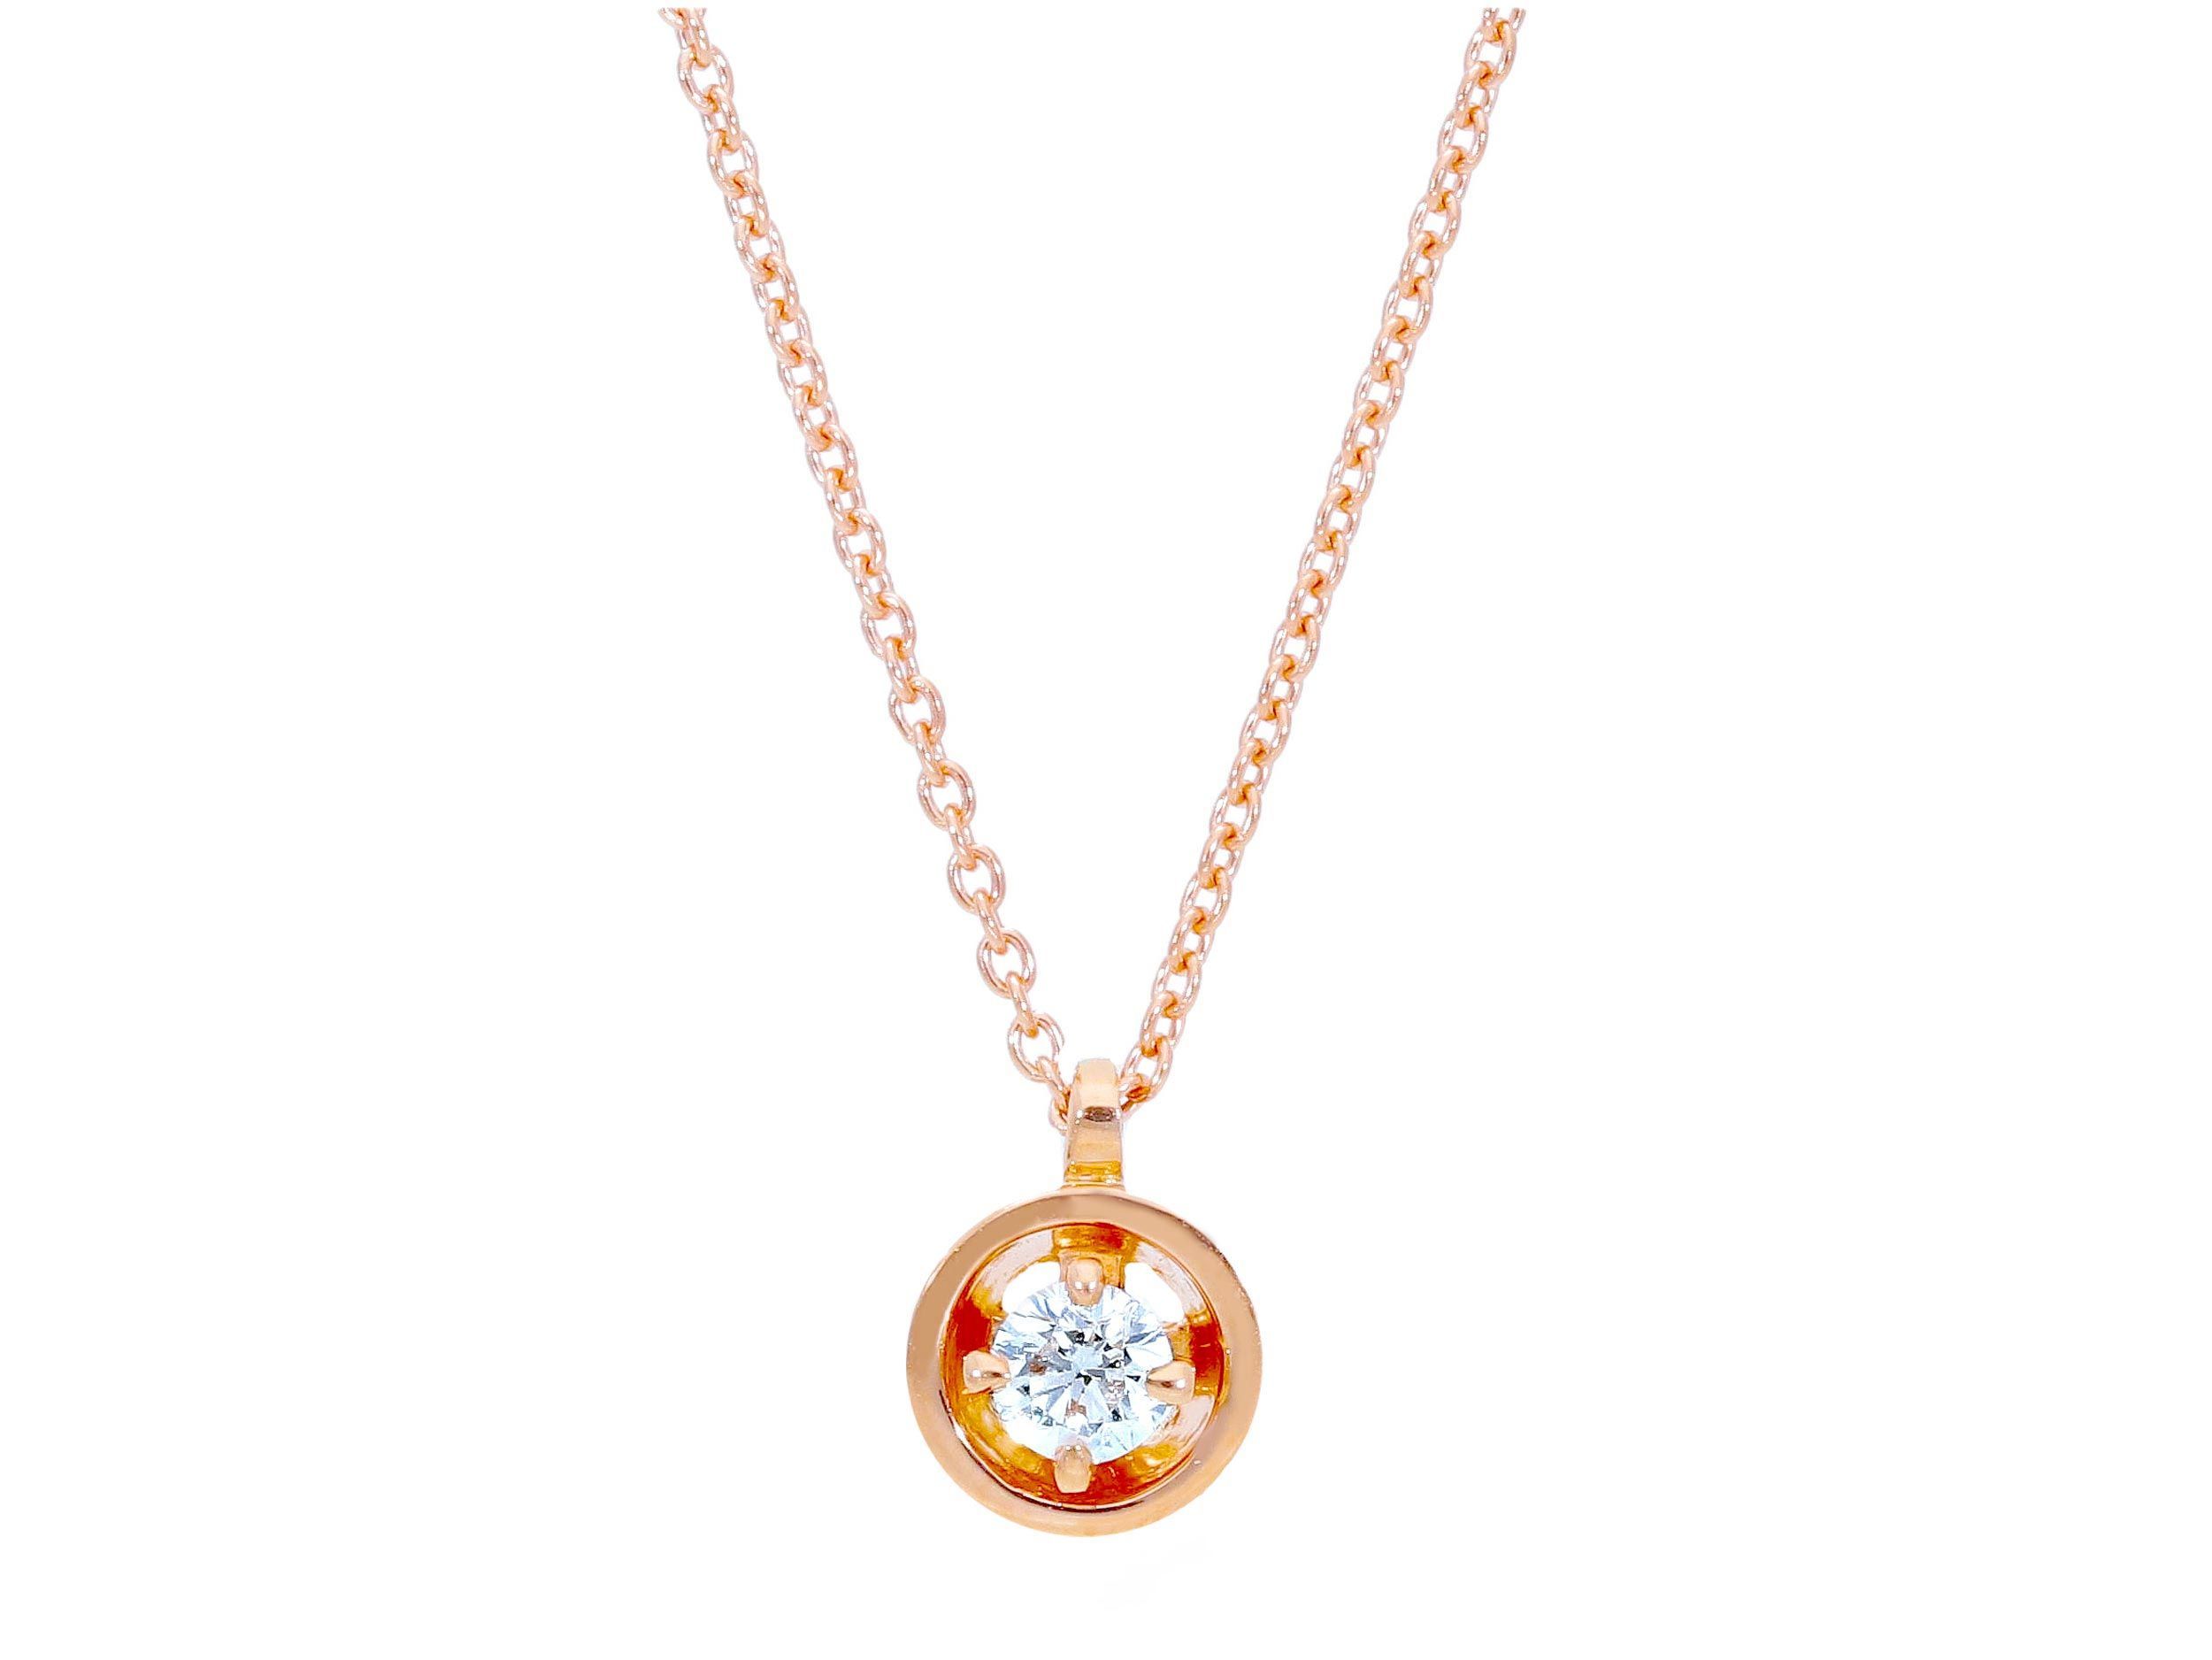 Rose gold single stone necklace k18 with diamond  (code S217566)